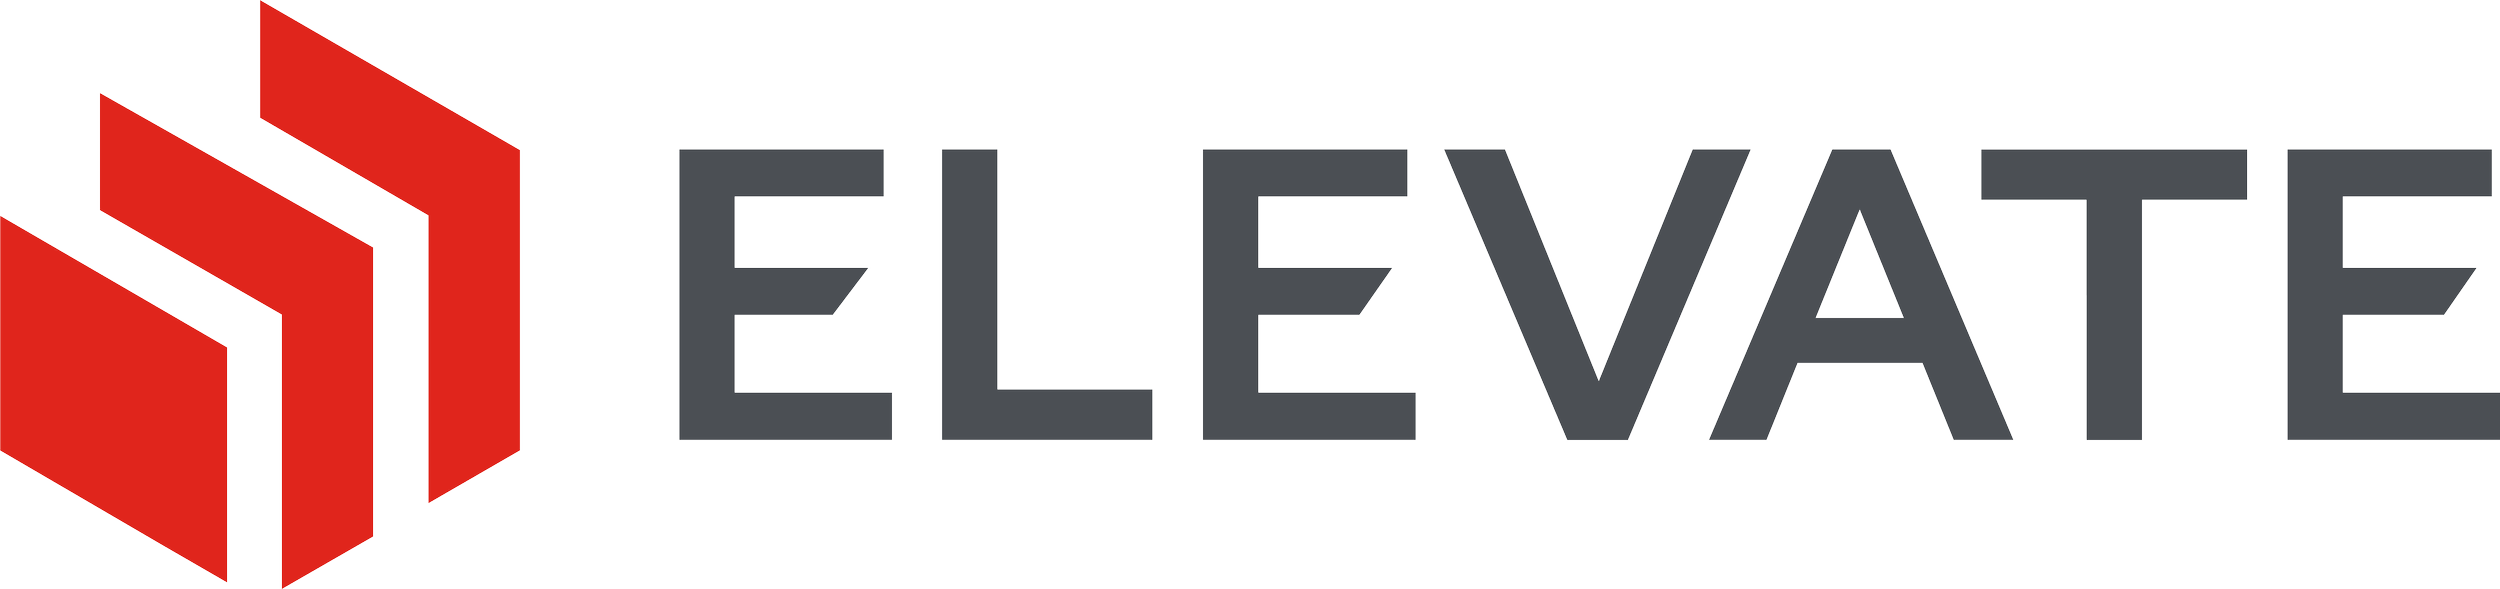 Elevate_logo_red_RGB.png